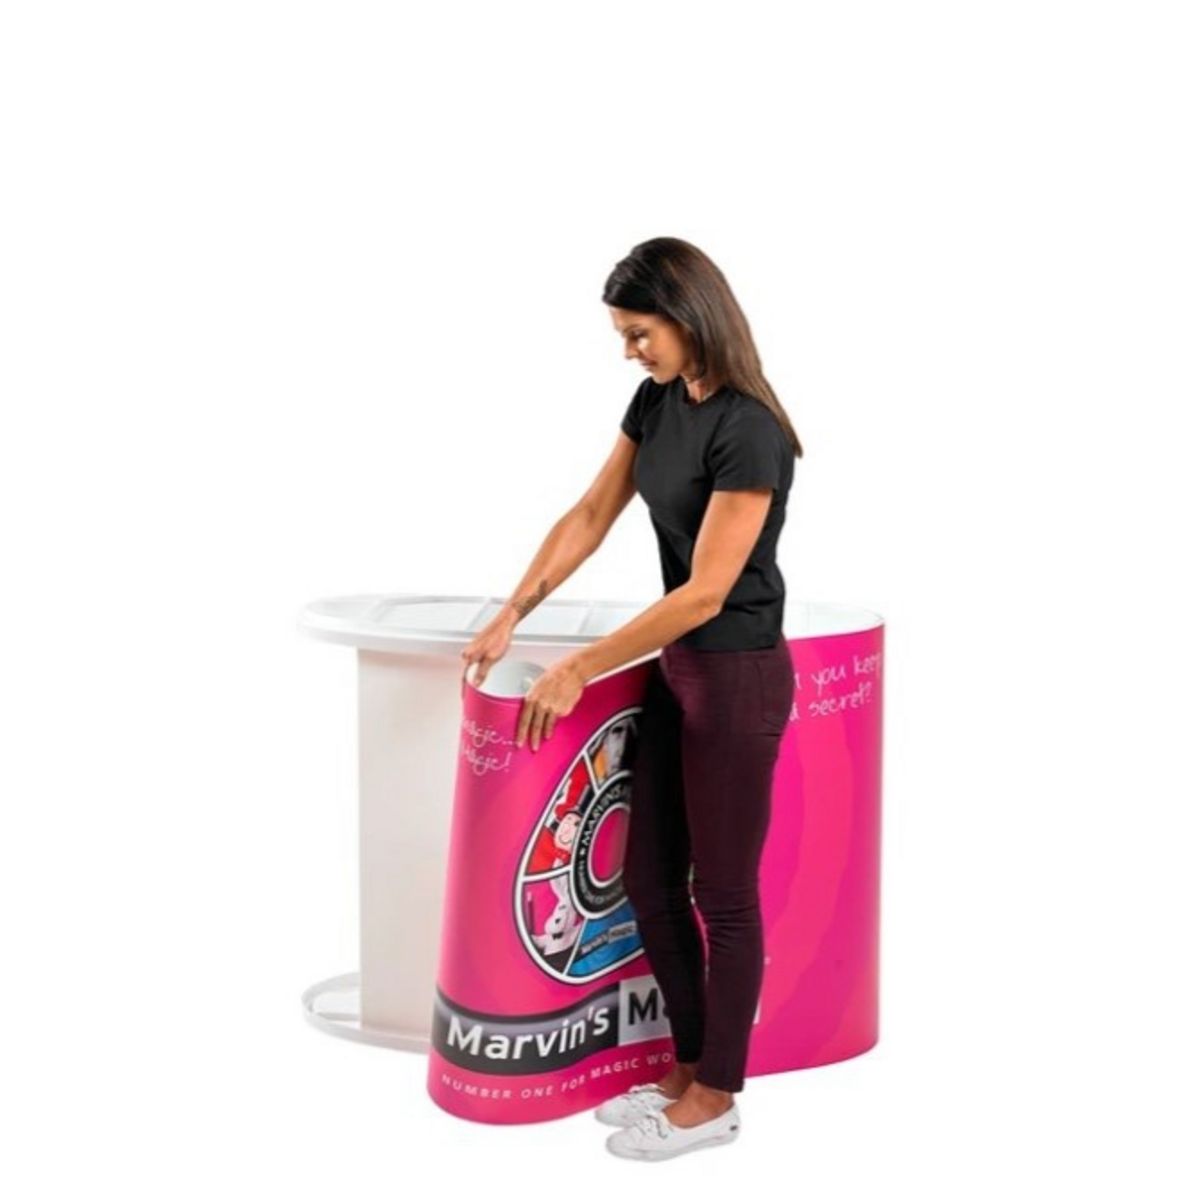 Lady adding the Marvin Magic graphic to the Finesse promotional display counter. 1.jpg